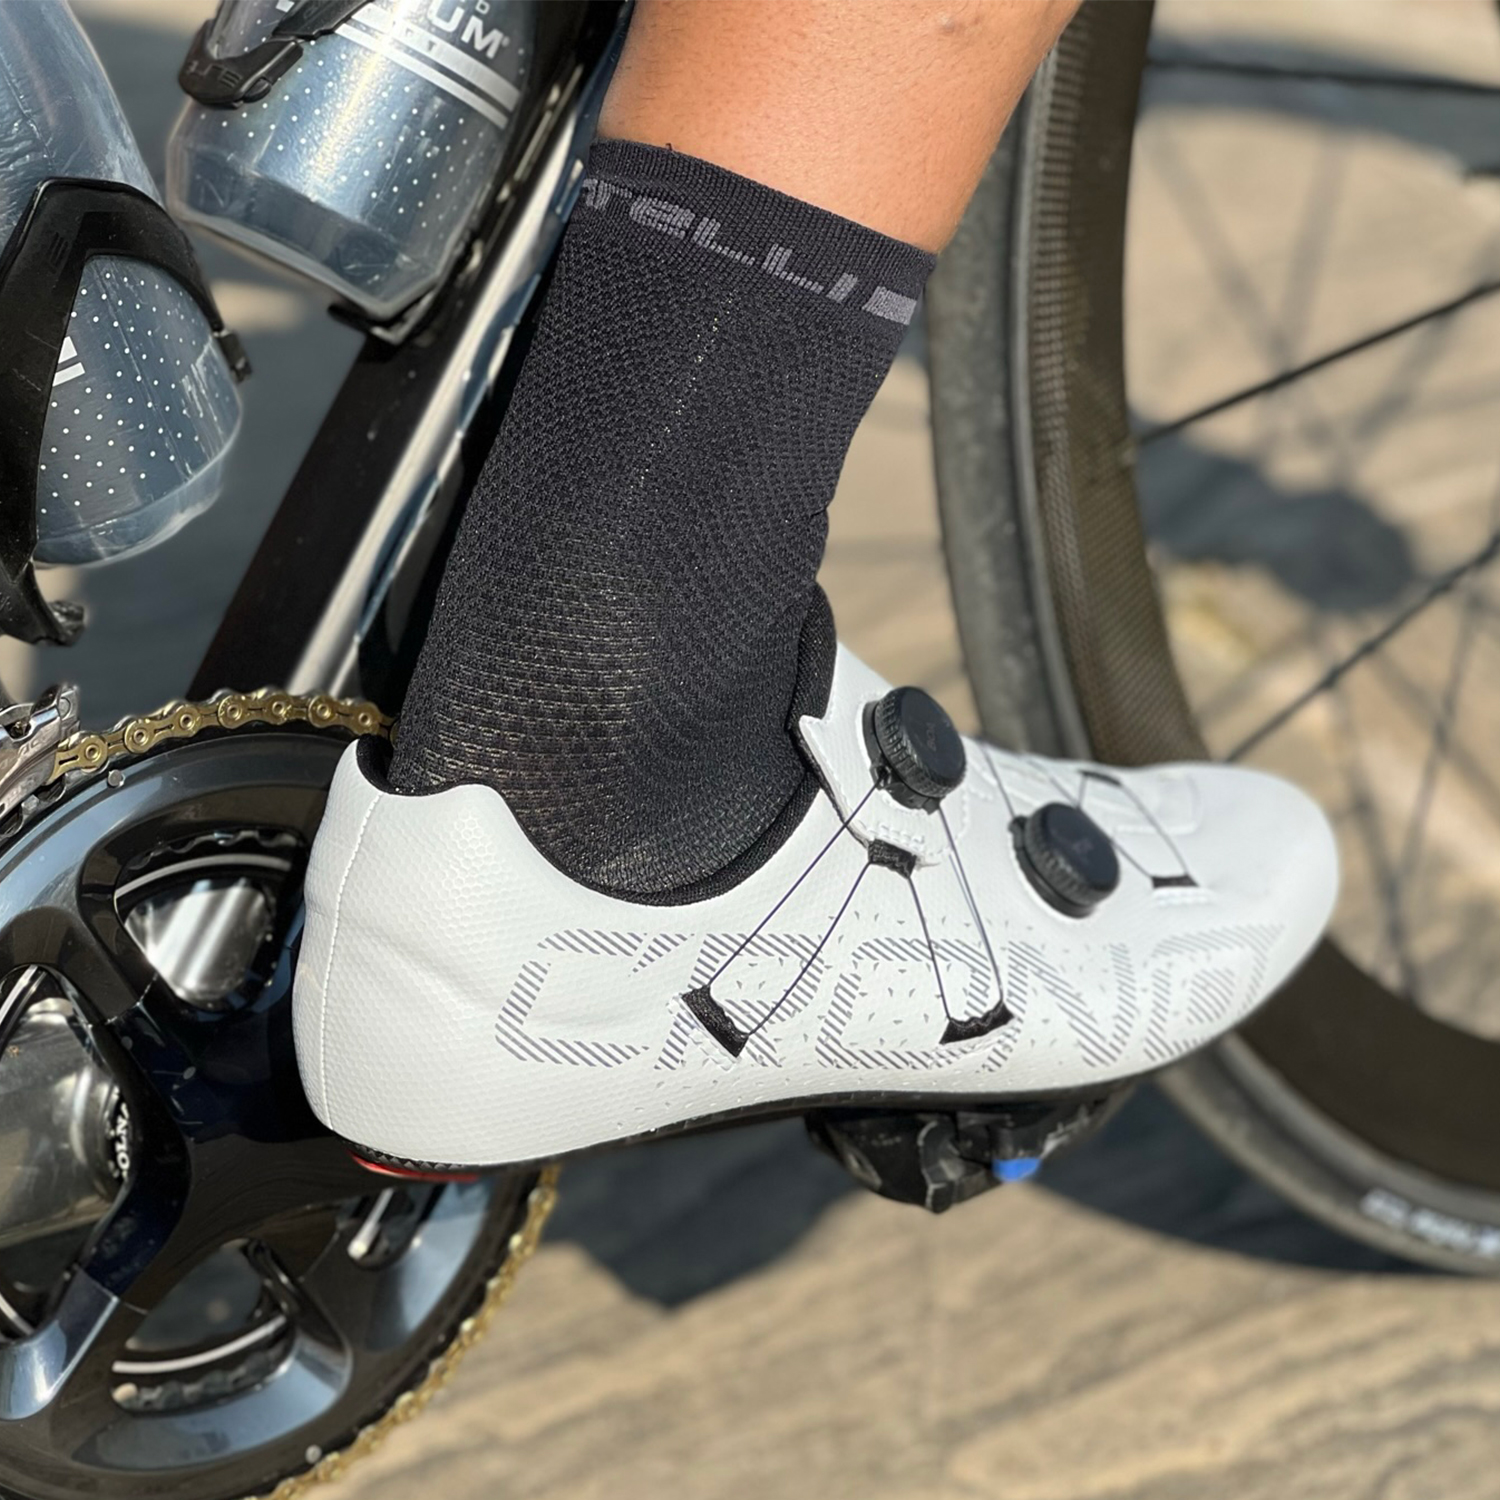 Crono CR1 Carbon Road Shoes | Merlin Cycles